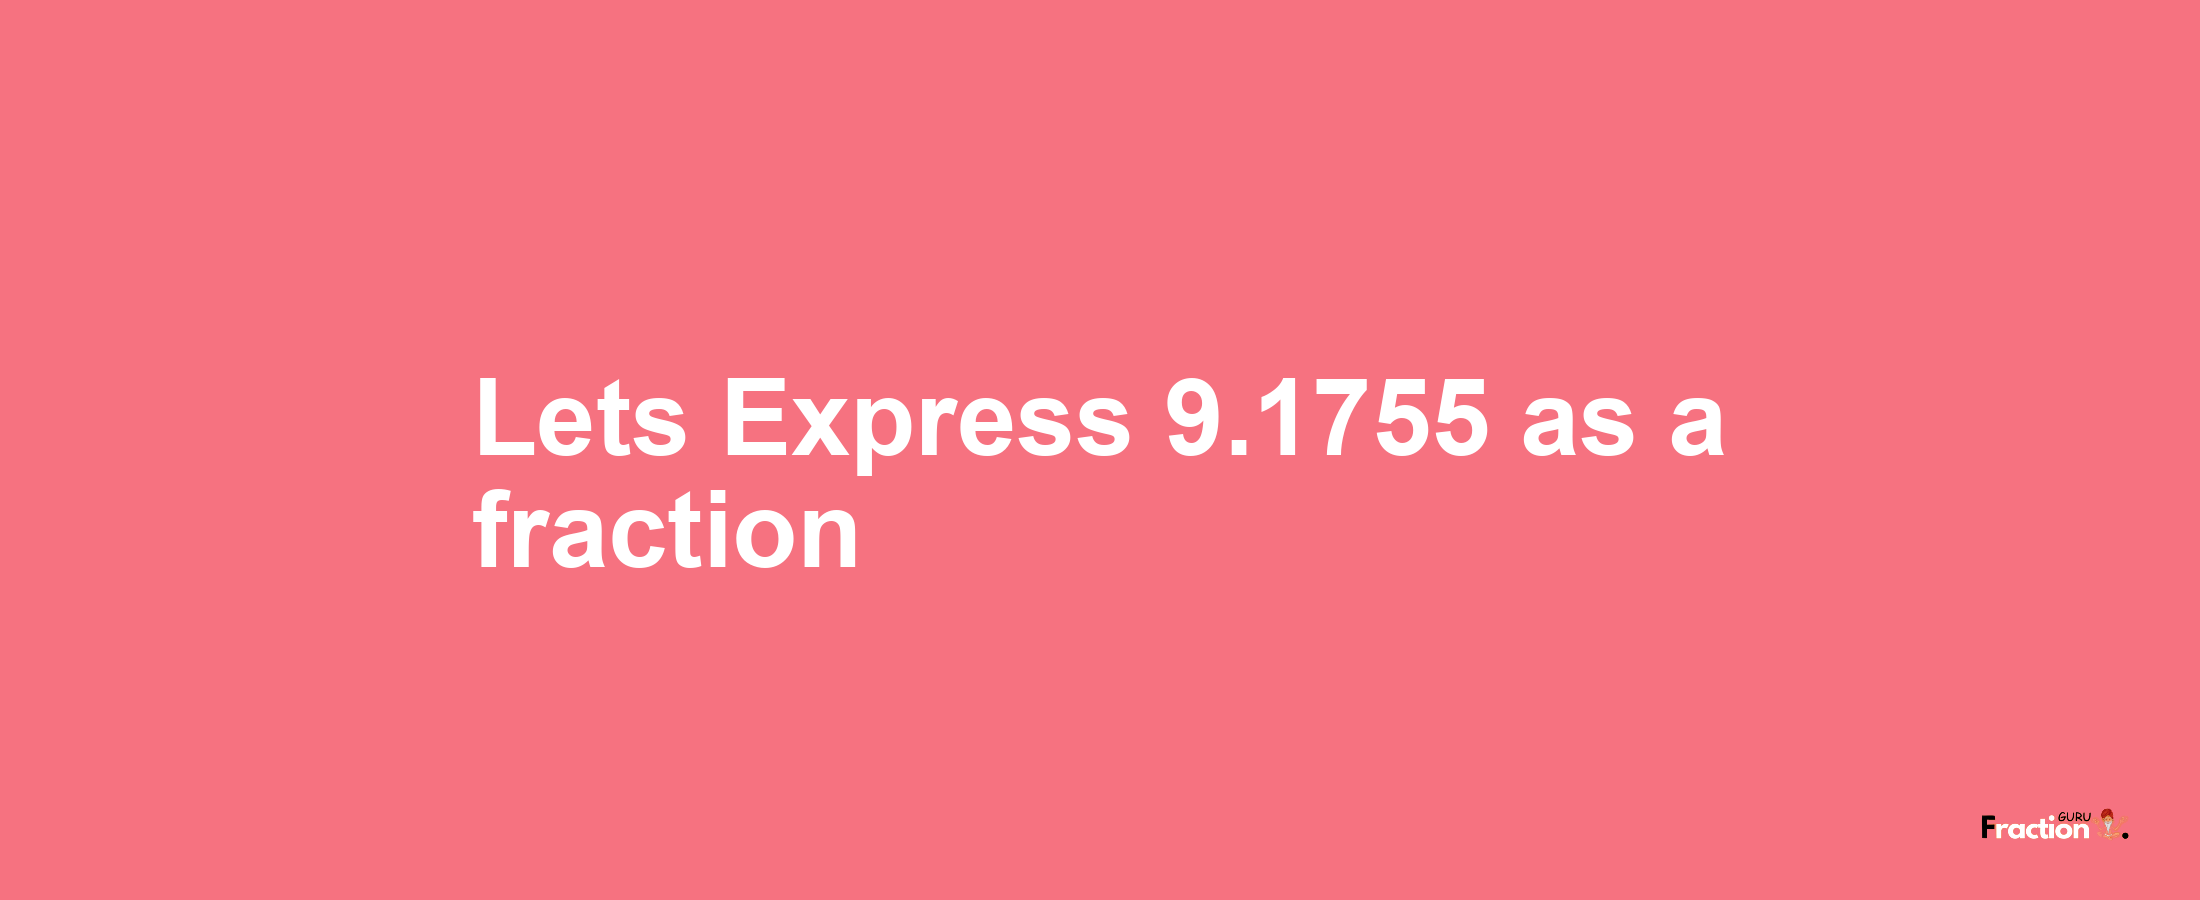 Lets Express 9.1755 as afraction